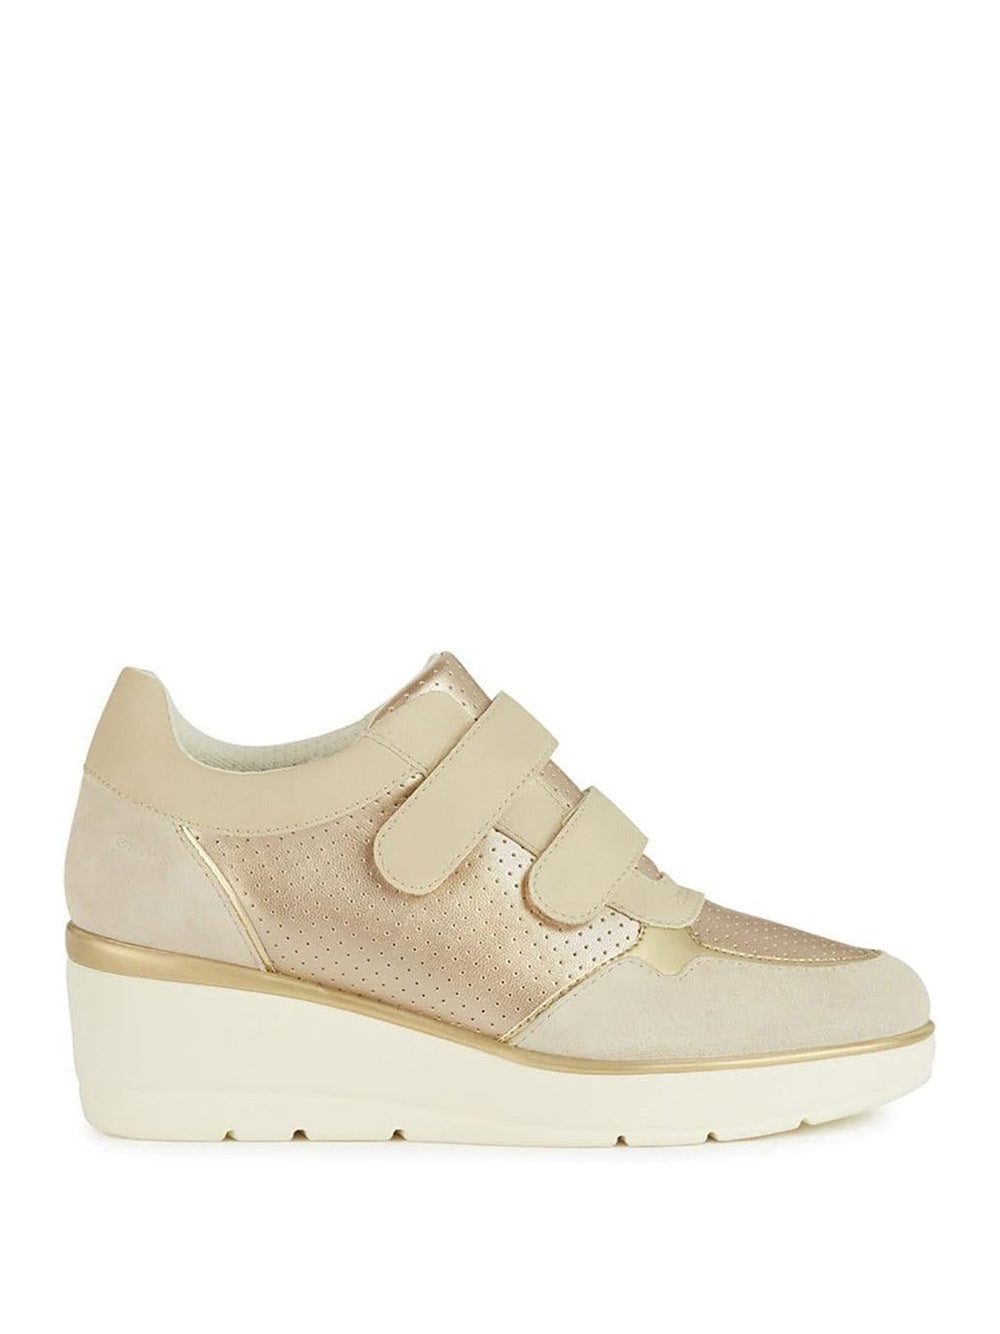 GEOX Sneakers Donna - Oro modello D25RAB 0NFEK